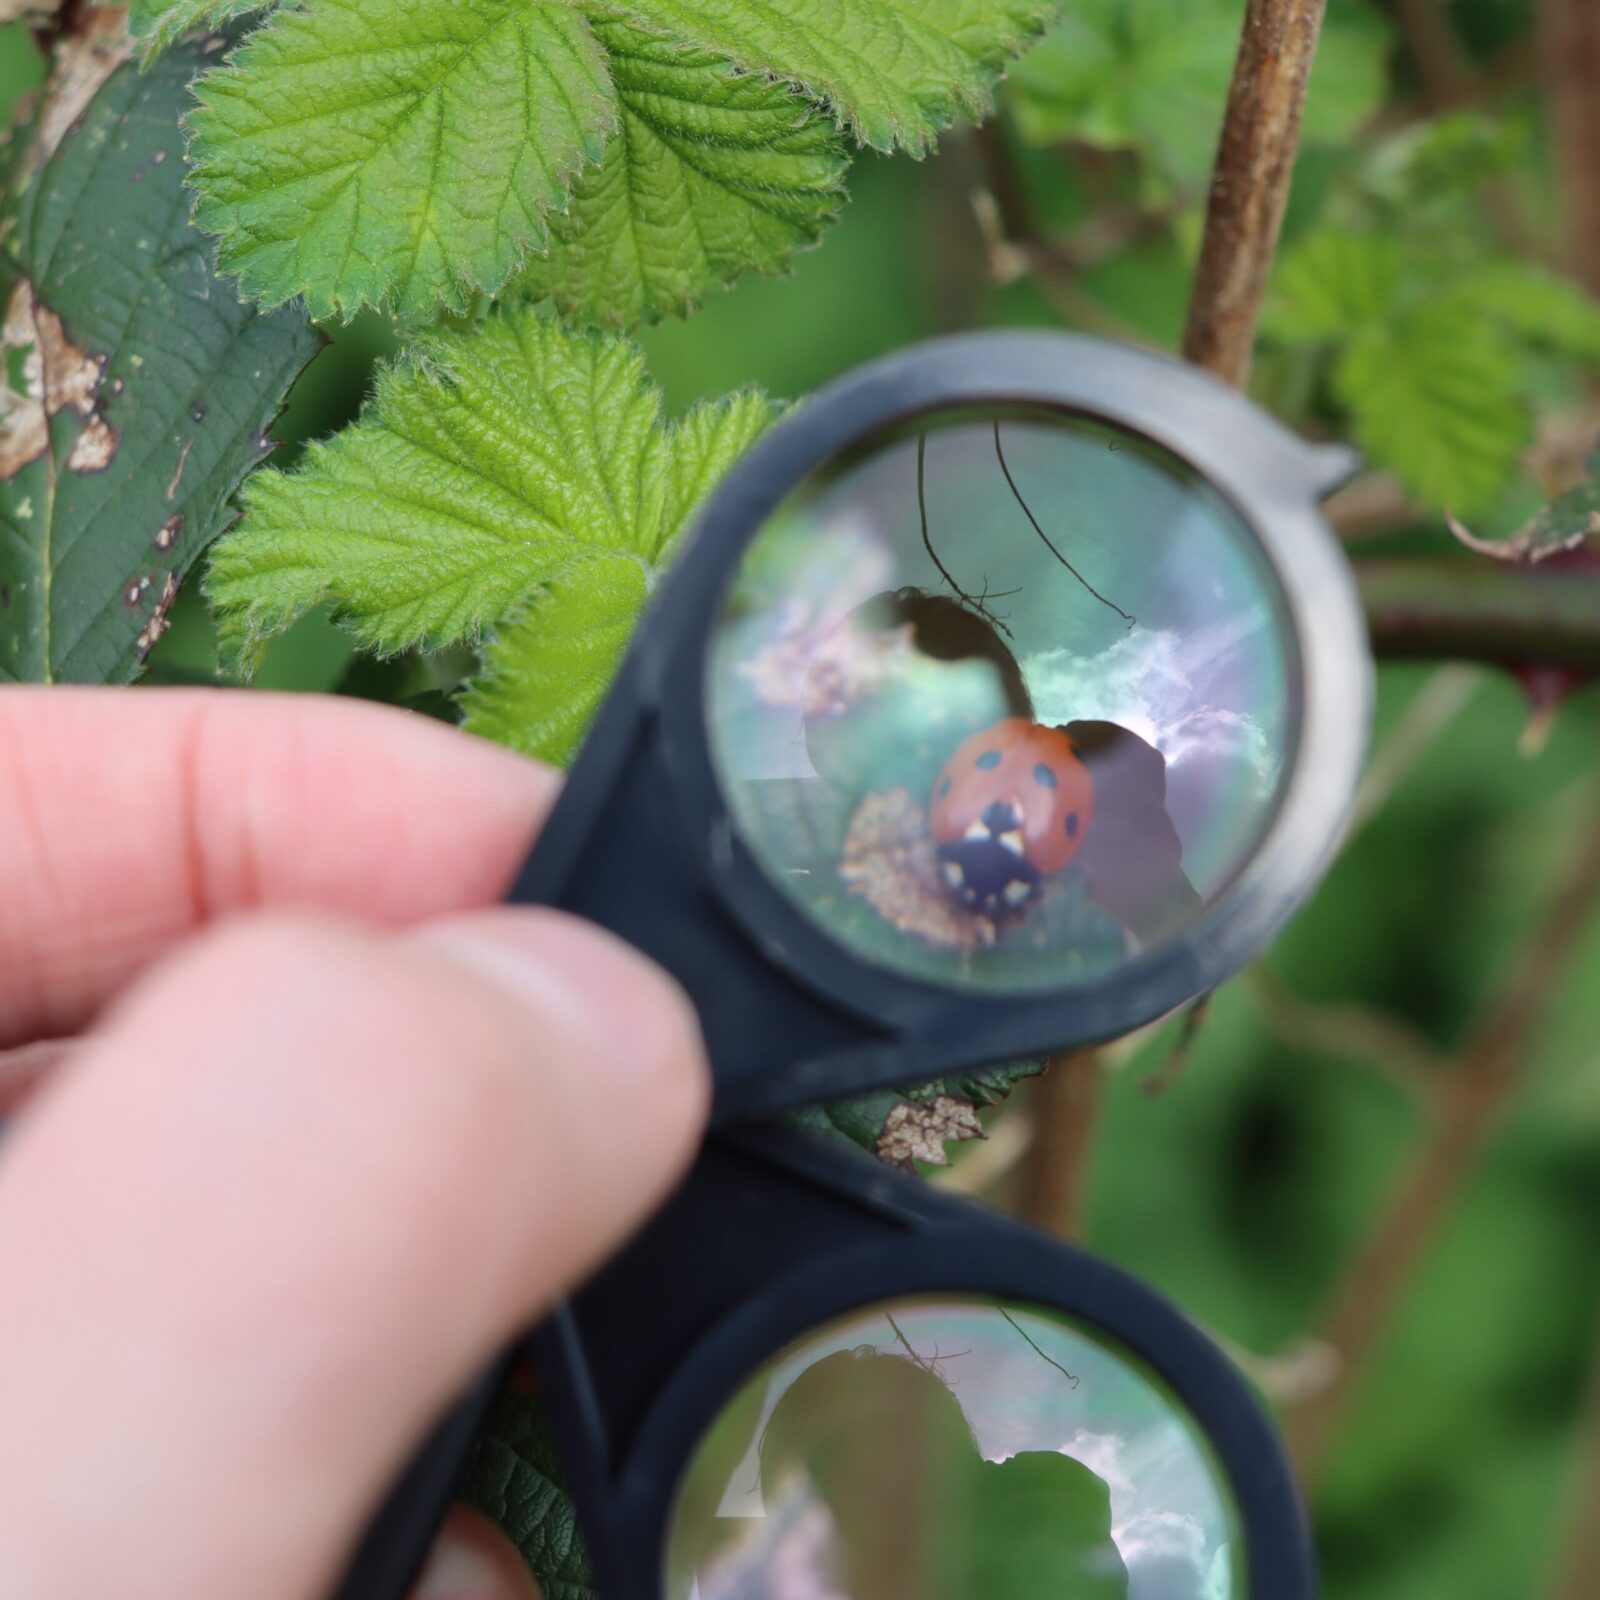 Ladybird being viewed in a magnifying lens.